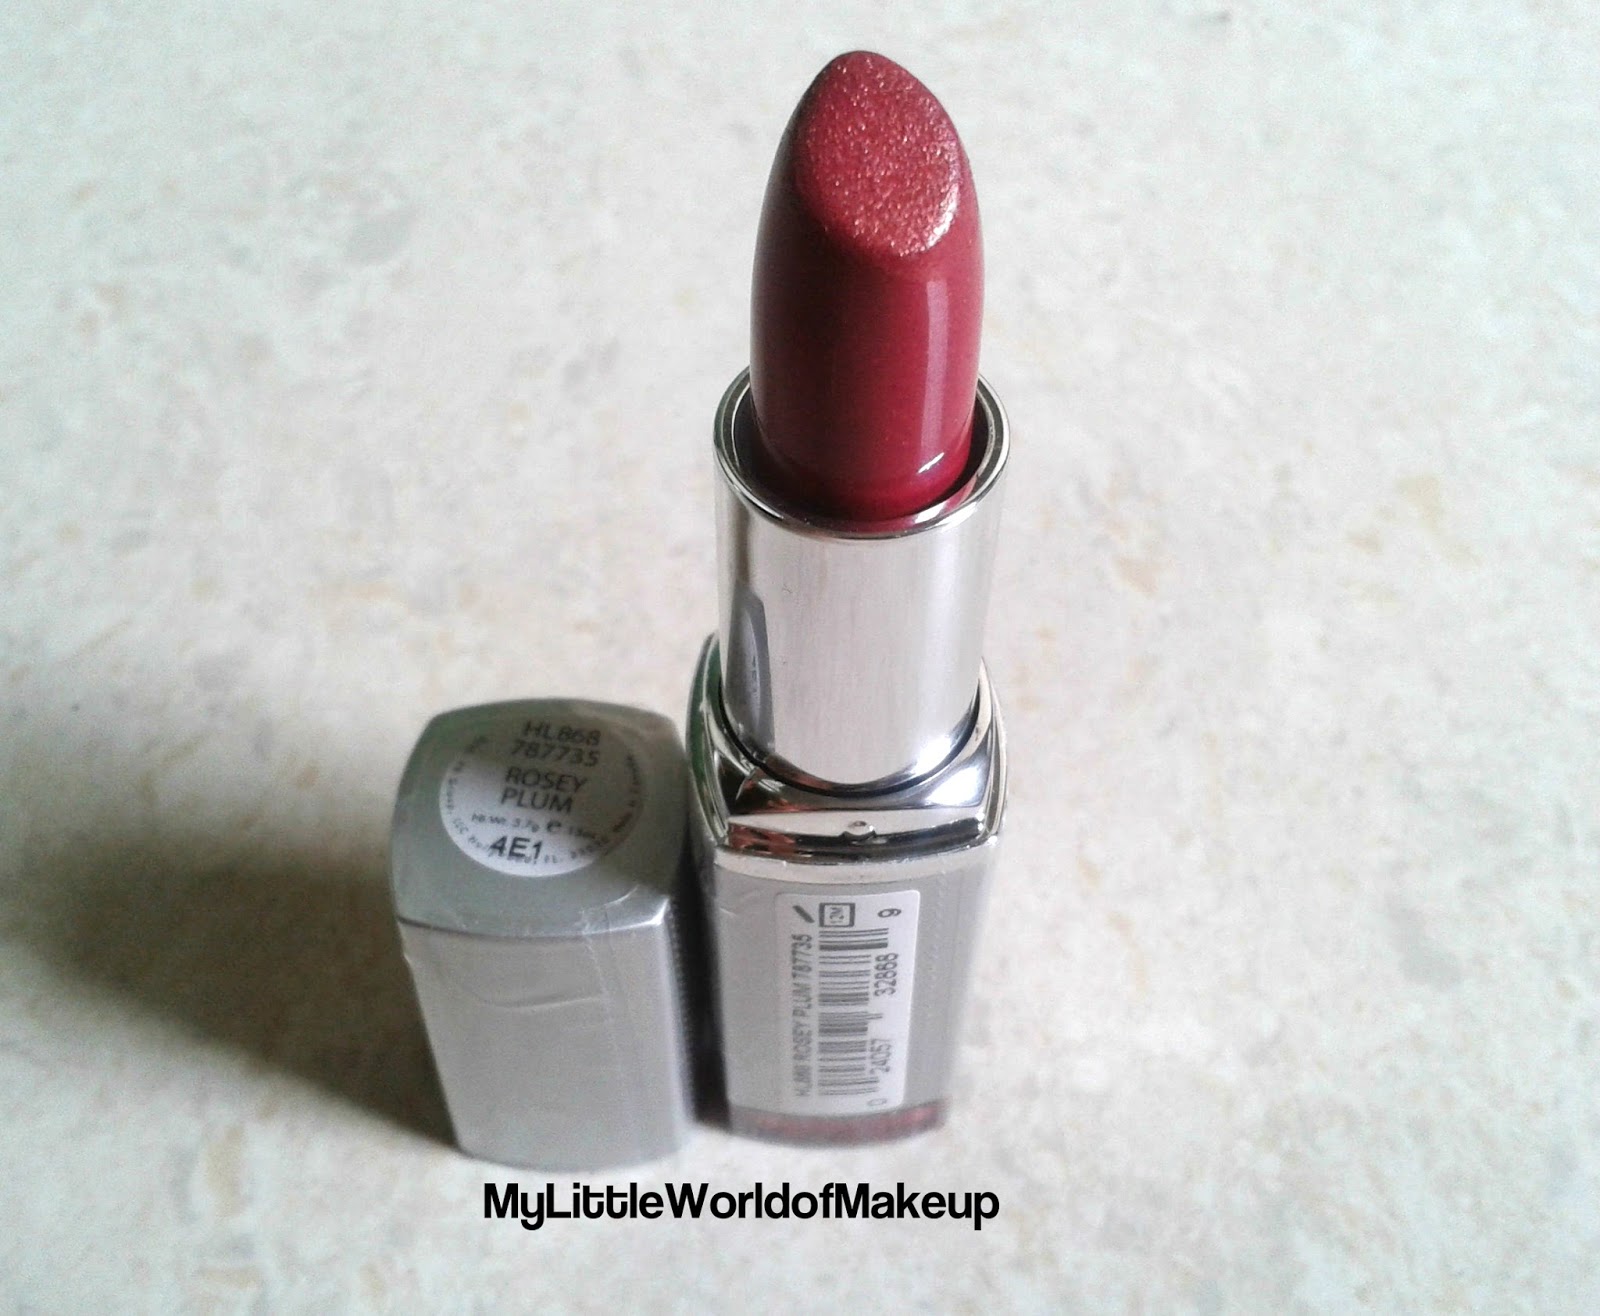 Sanny Leone Fuked Her Pussy A Nigro Dick Fuck Pussy Sex Com - Palladio Herbal Lipstick in Rosey Plum Review & Swatches